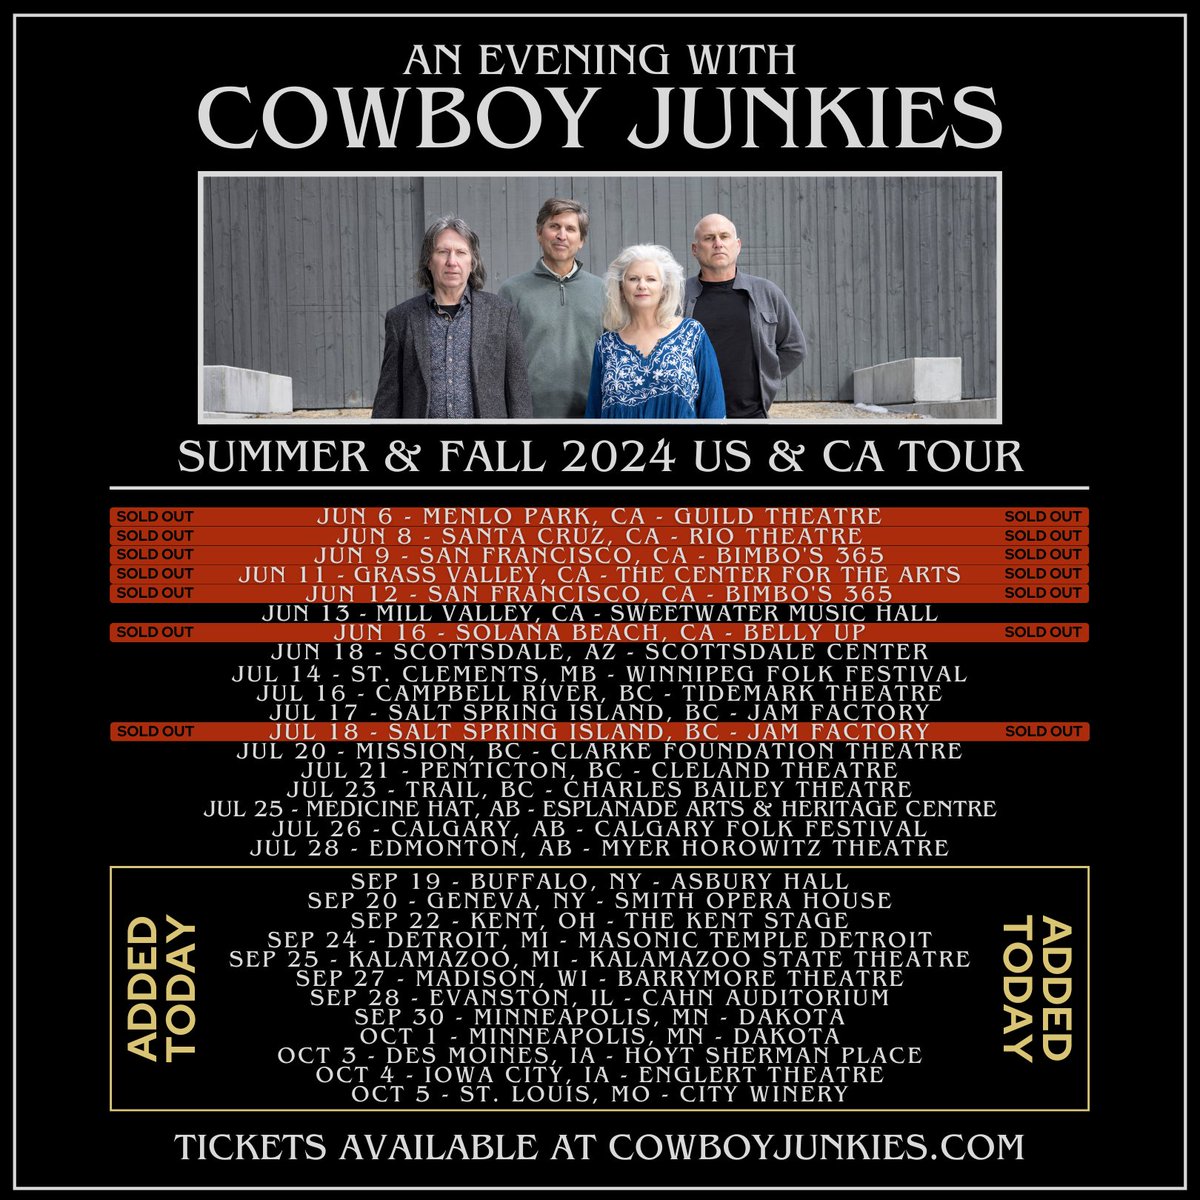 Hi Everyone! Our fall US tour just went on sale today! Tickets available at cowboyjunkies.com/tour We’re looking forward to seeing more of you soon! #cowboyjunkies #tour